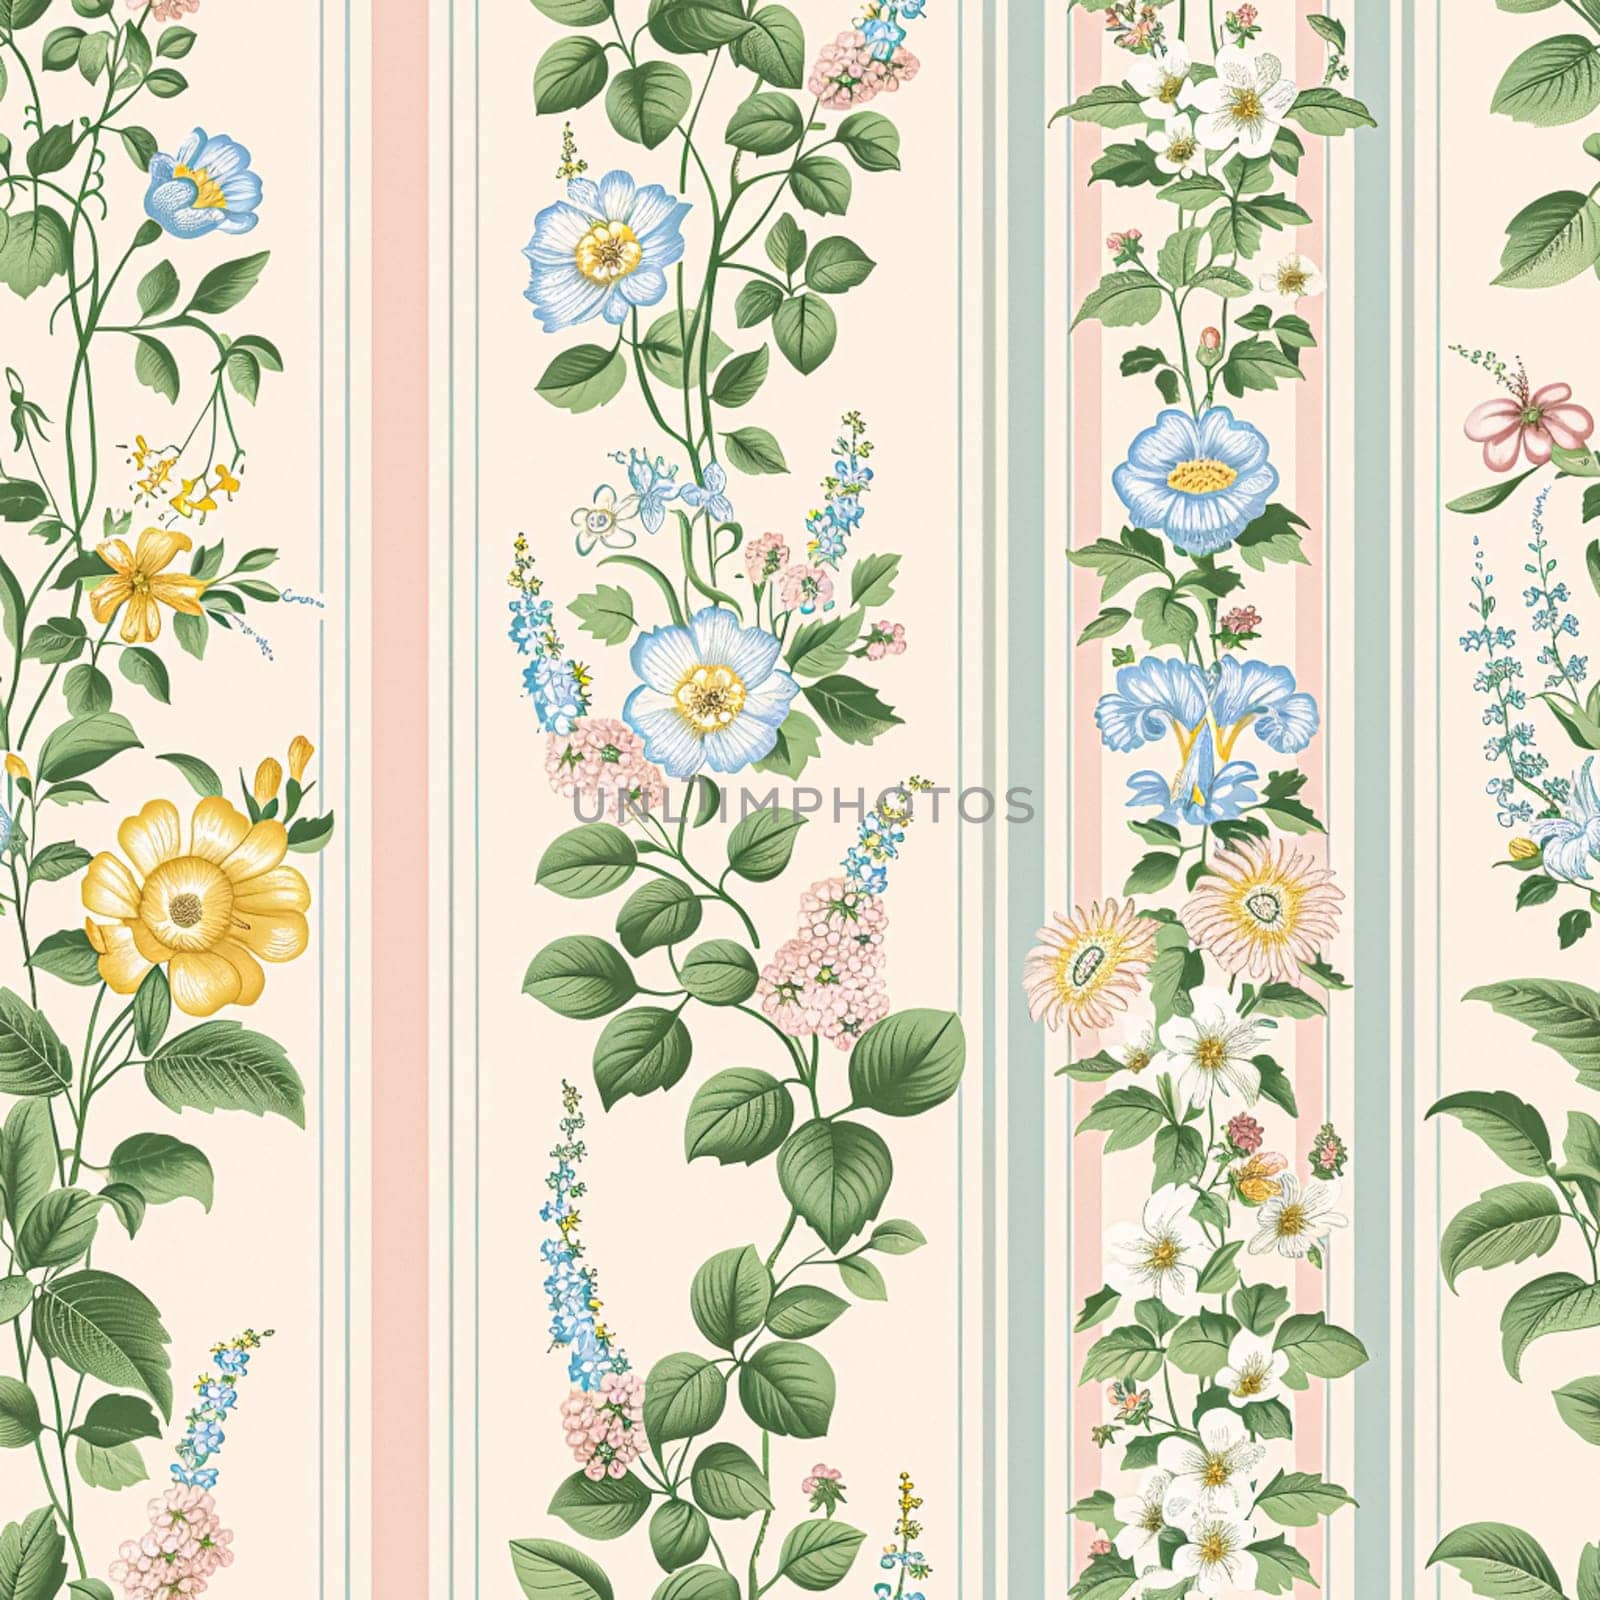 Seamless pattern, tileable floral holiday country cottage print, English countryside flowers theme for wallpaper, gift wrapping paper, scrapbook, fabric and product design inspiration